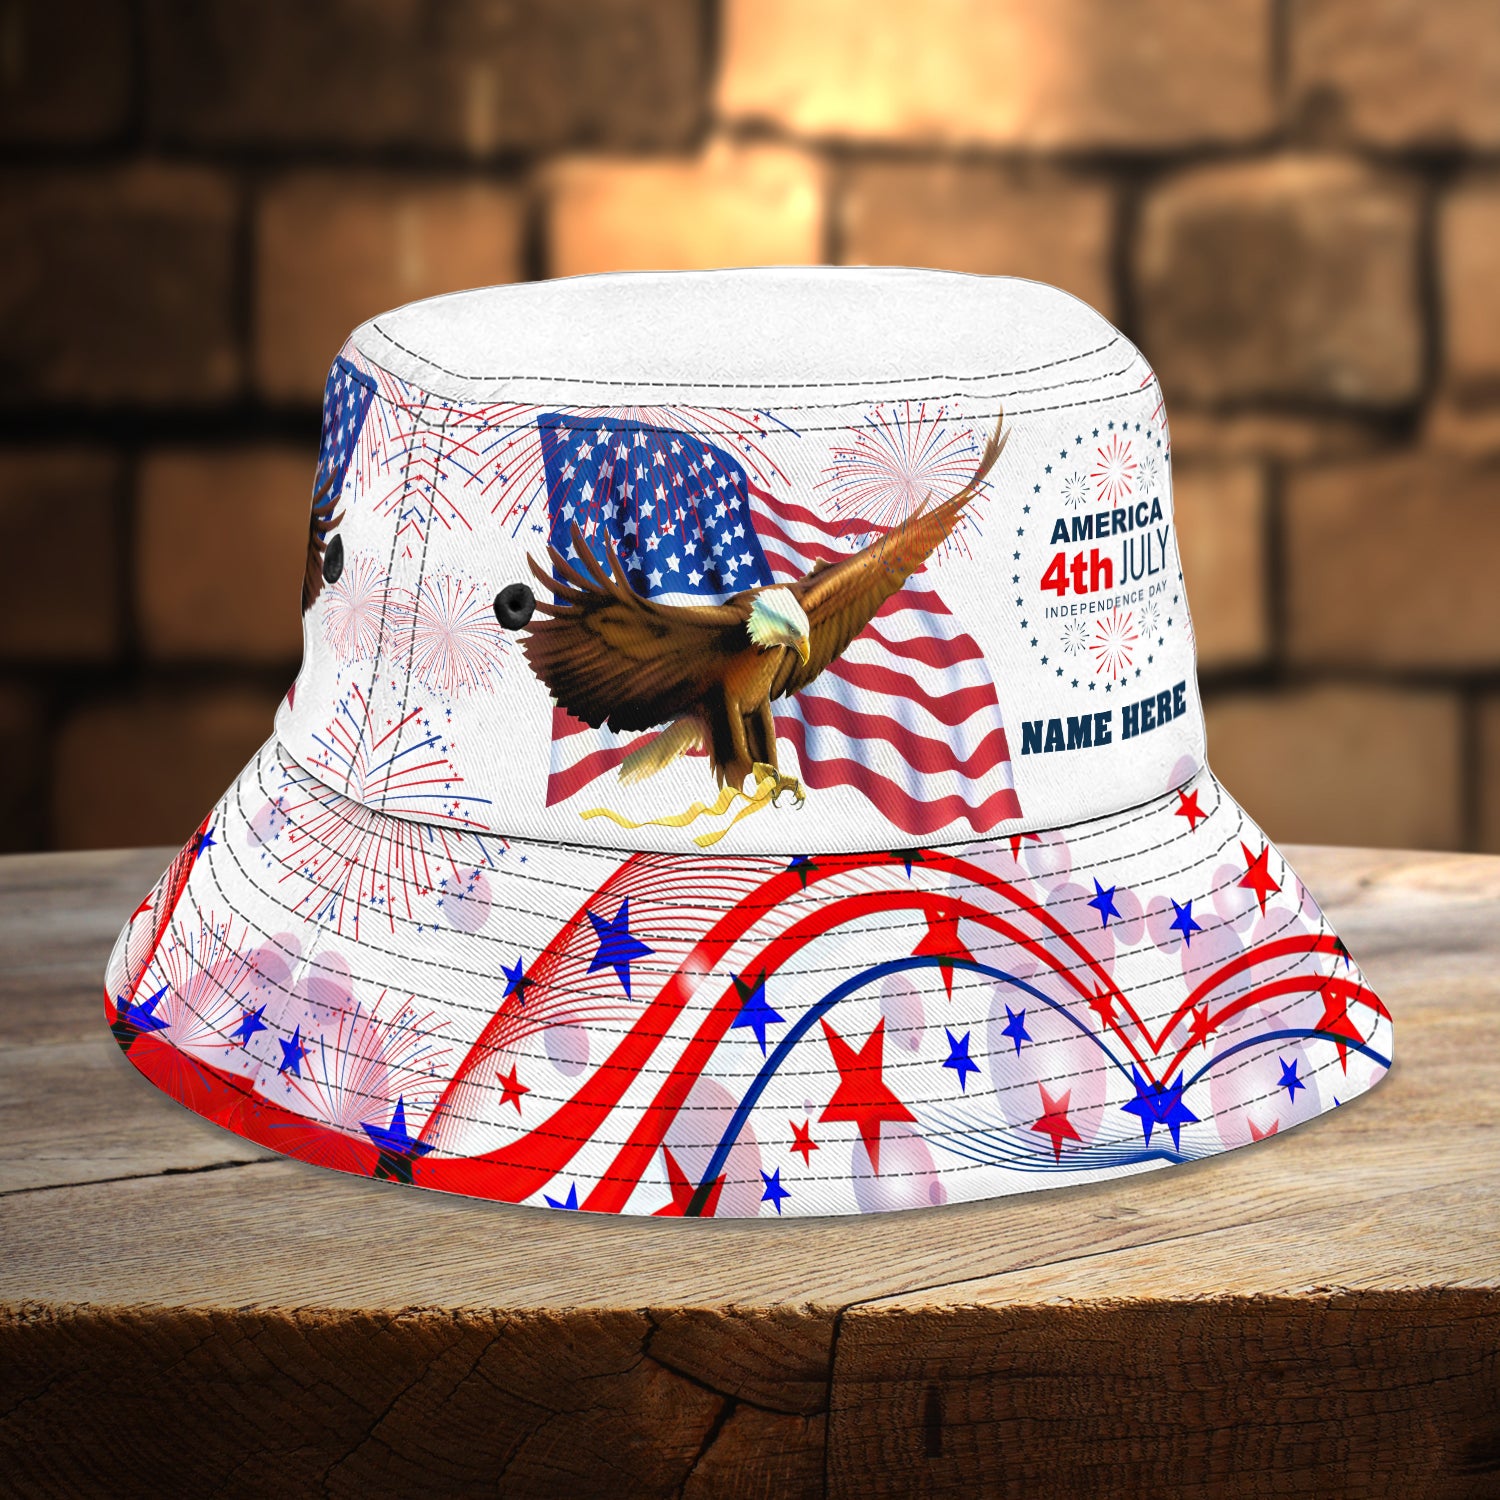 Custom Bucket Hat - Independence - Fuly 2